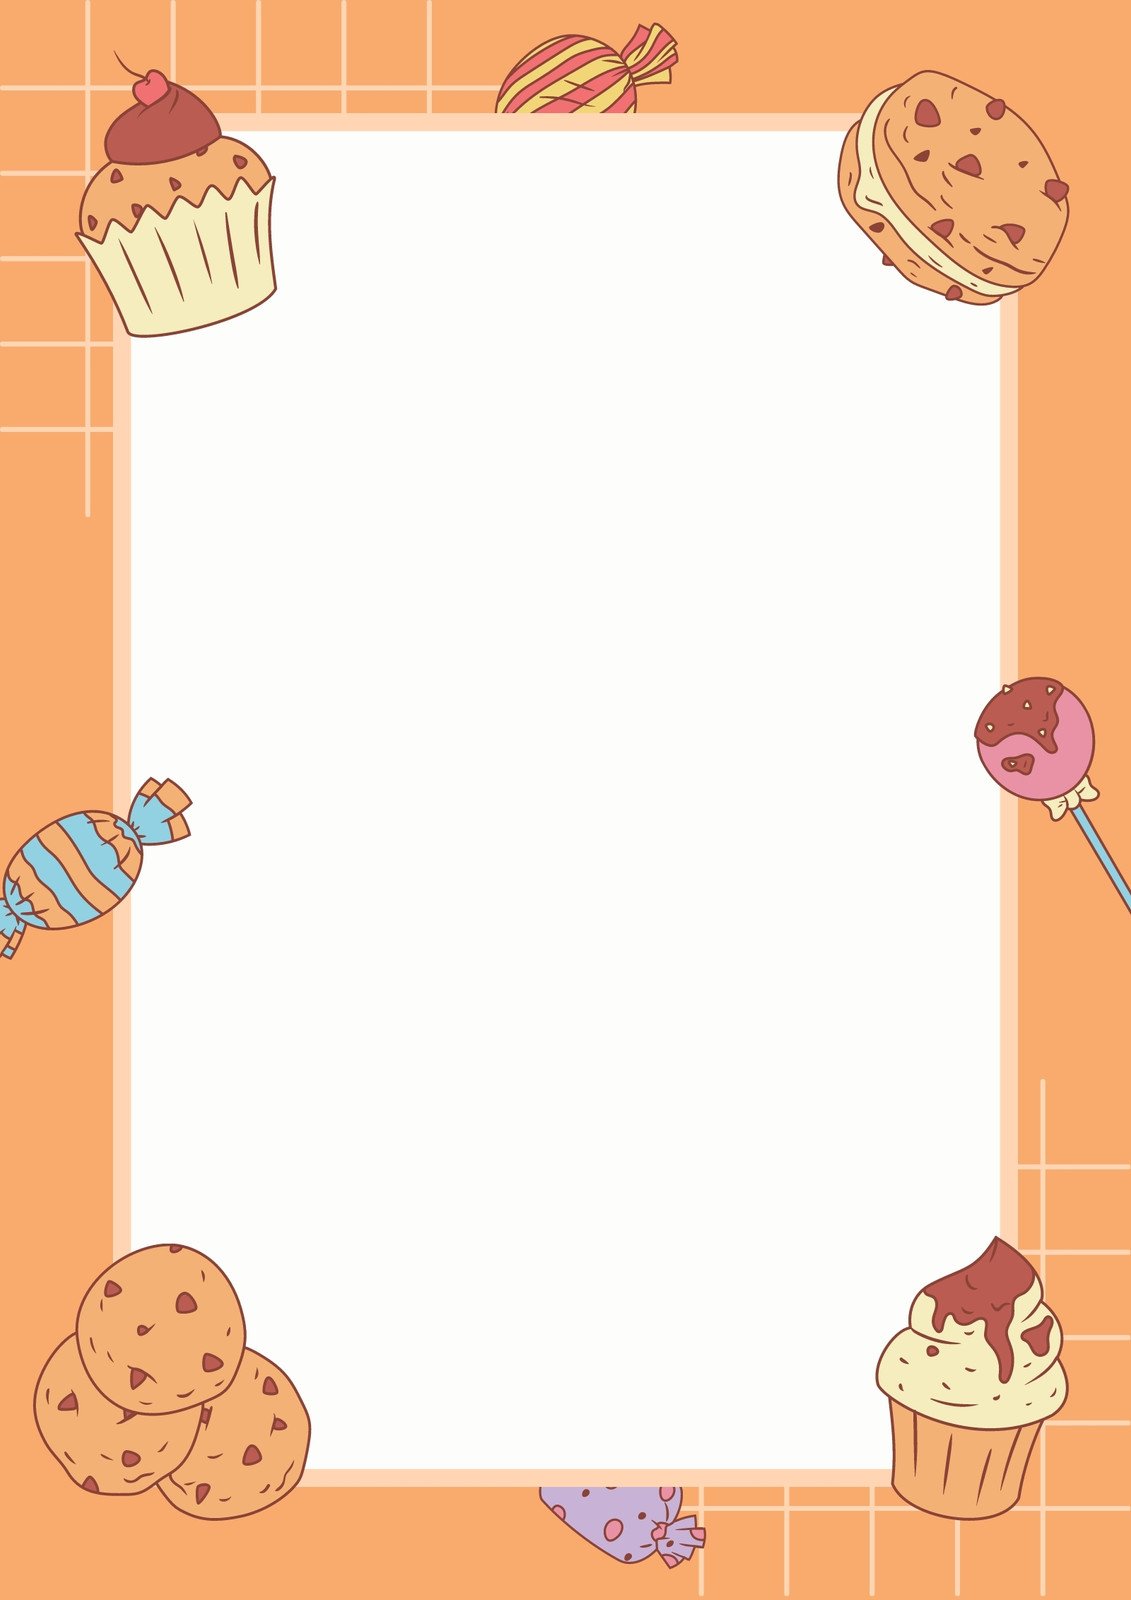 Bakery cake vector background free download